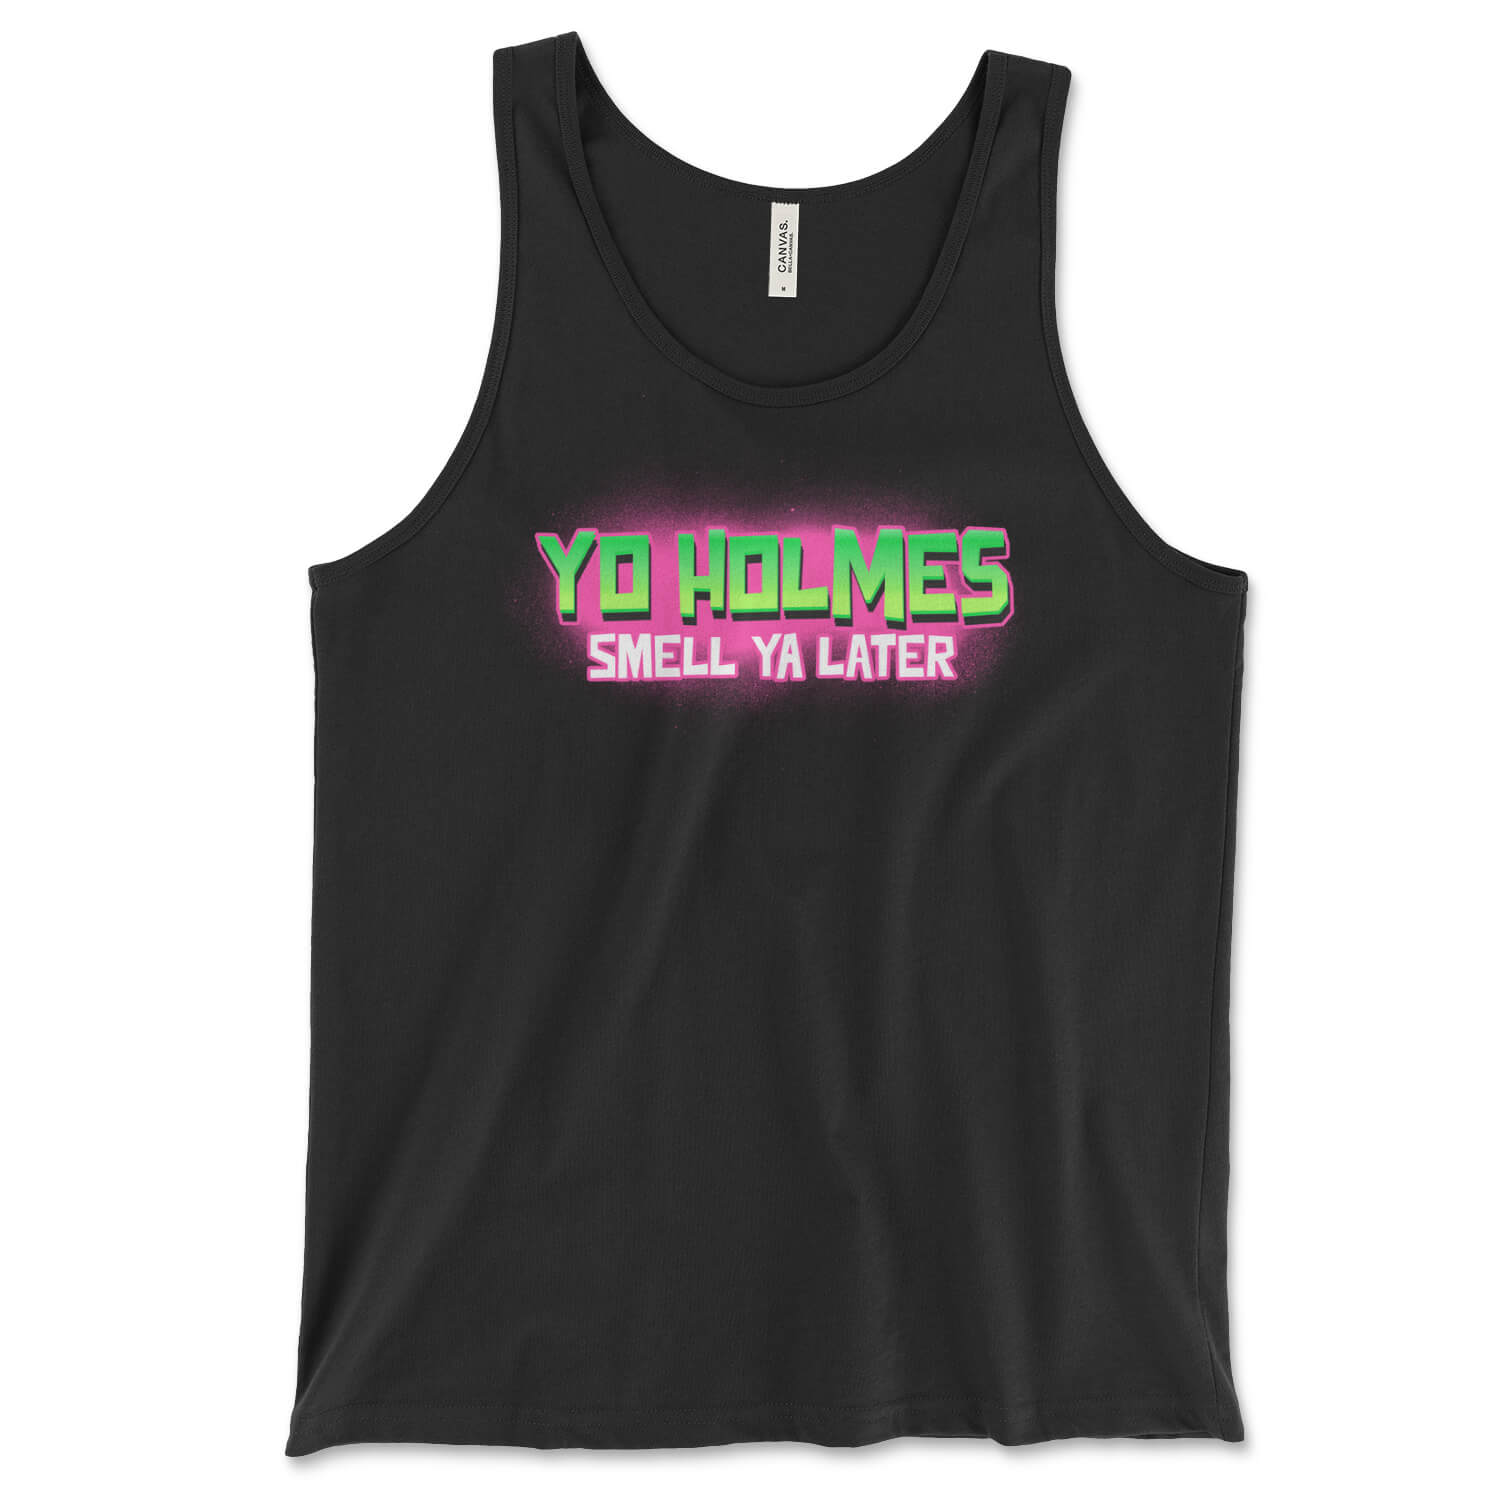 Fresh Prince of Bel-Air Yo Holmes Smell Ya Later black tank top from Phillygoat